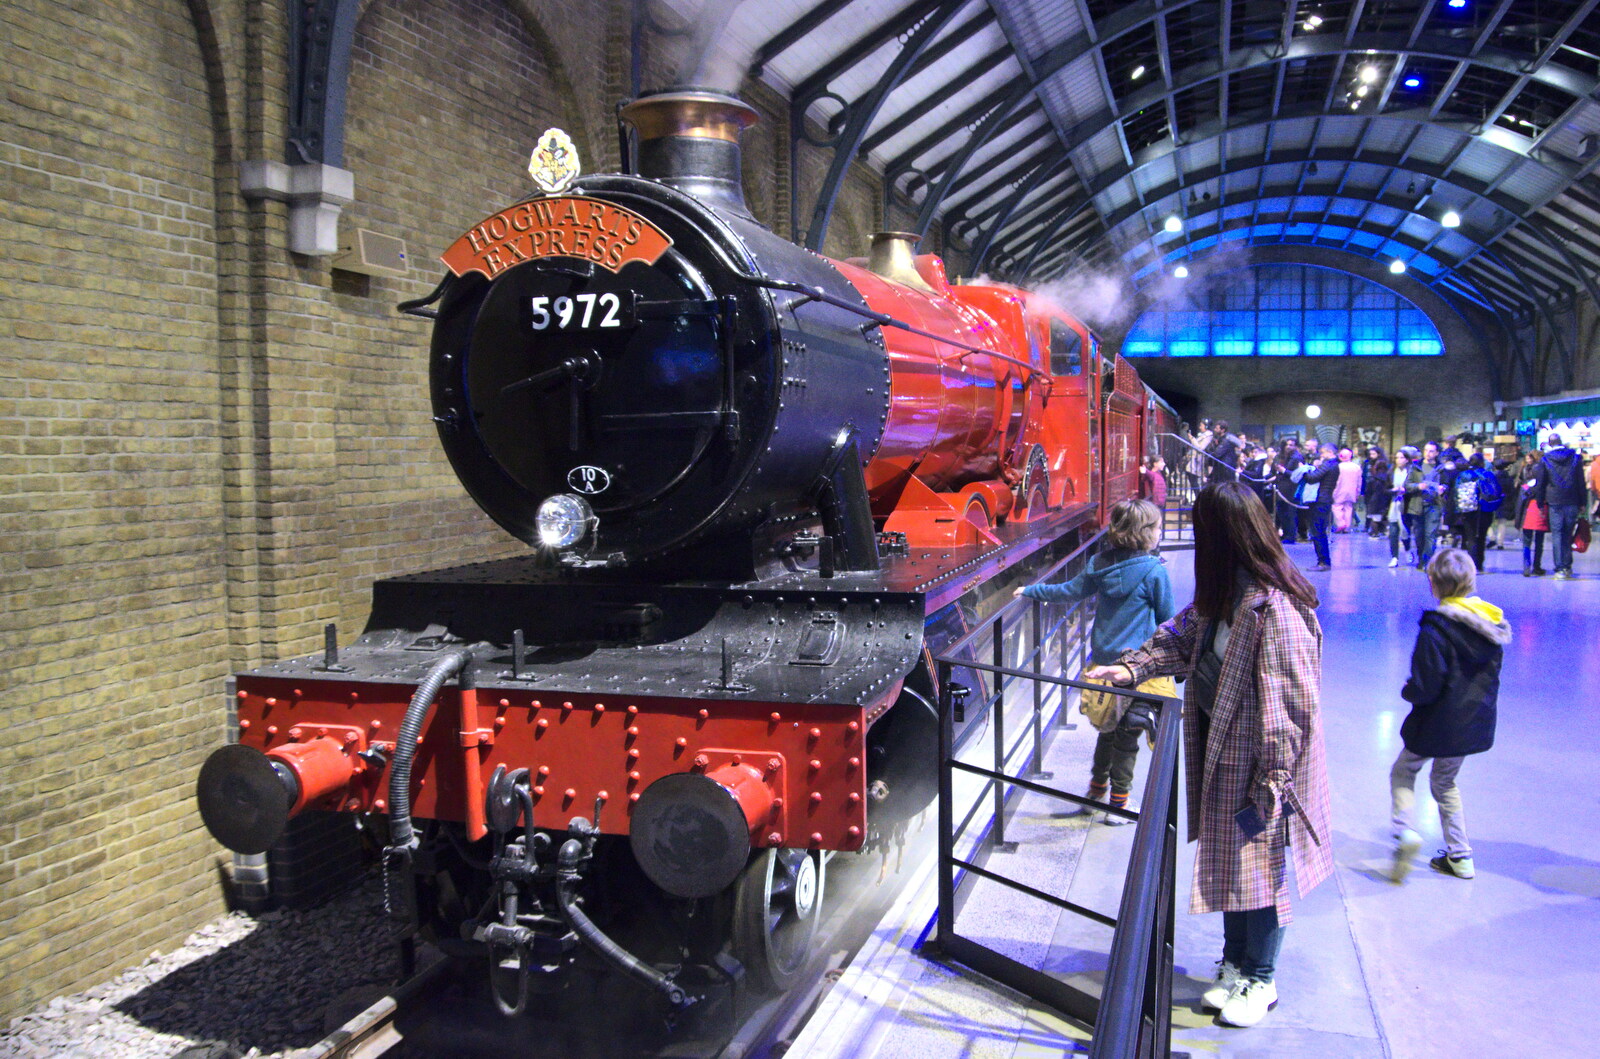 The Hogwart's Express from A Trip to Harry Potter World, Leavesden, Hertfordshire - 16th February 2020